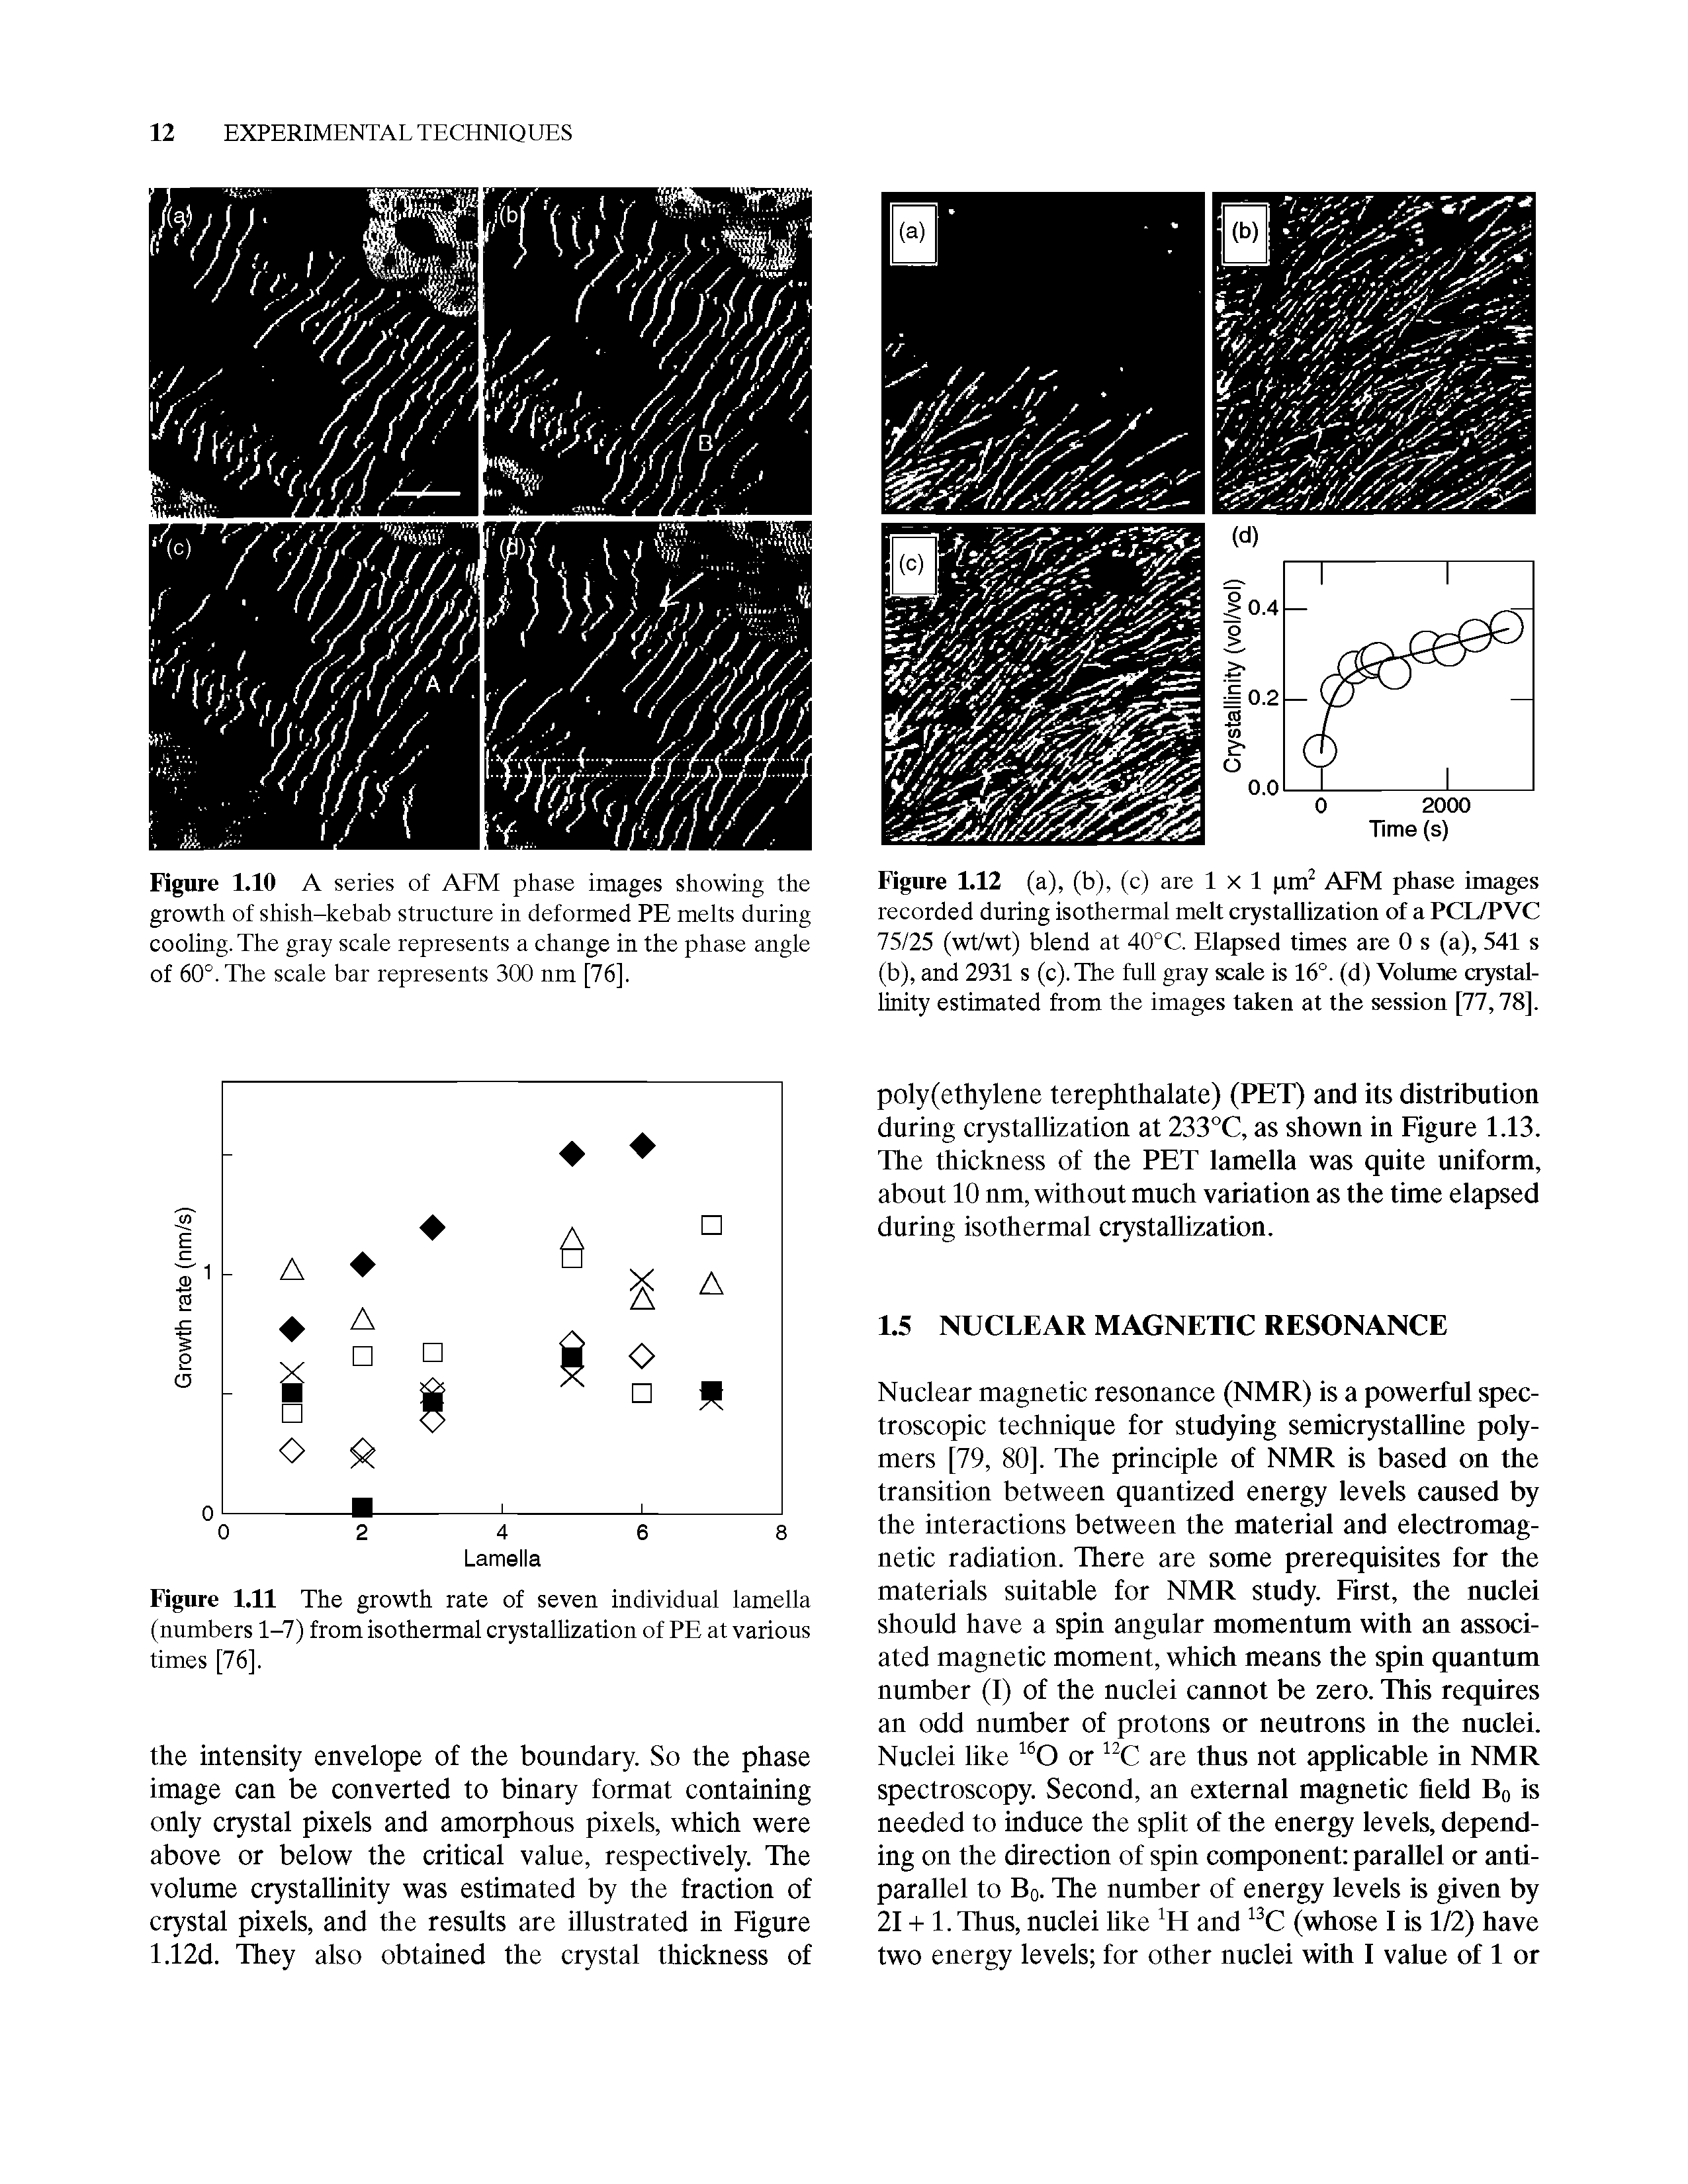 Figure 1.11 The growth rate of seven individual lamella (numbers 1-7) from isothermal crystallization of PE at various times [76].